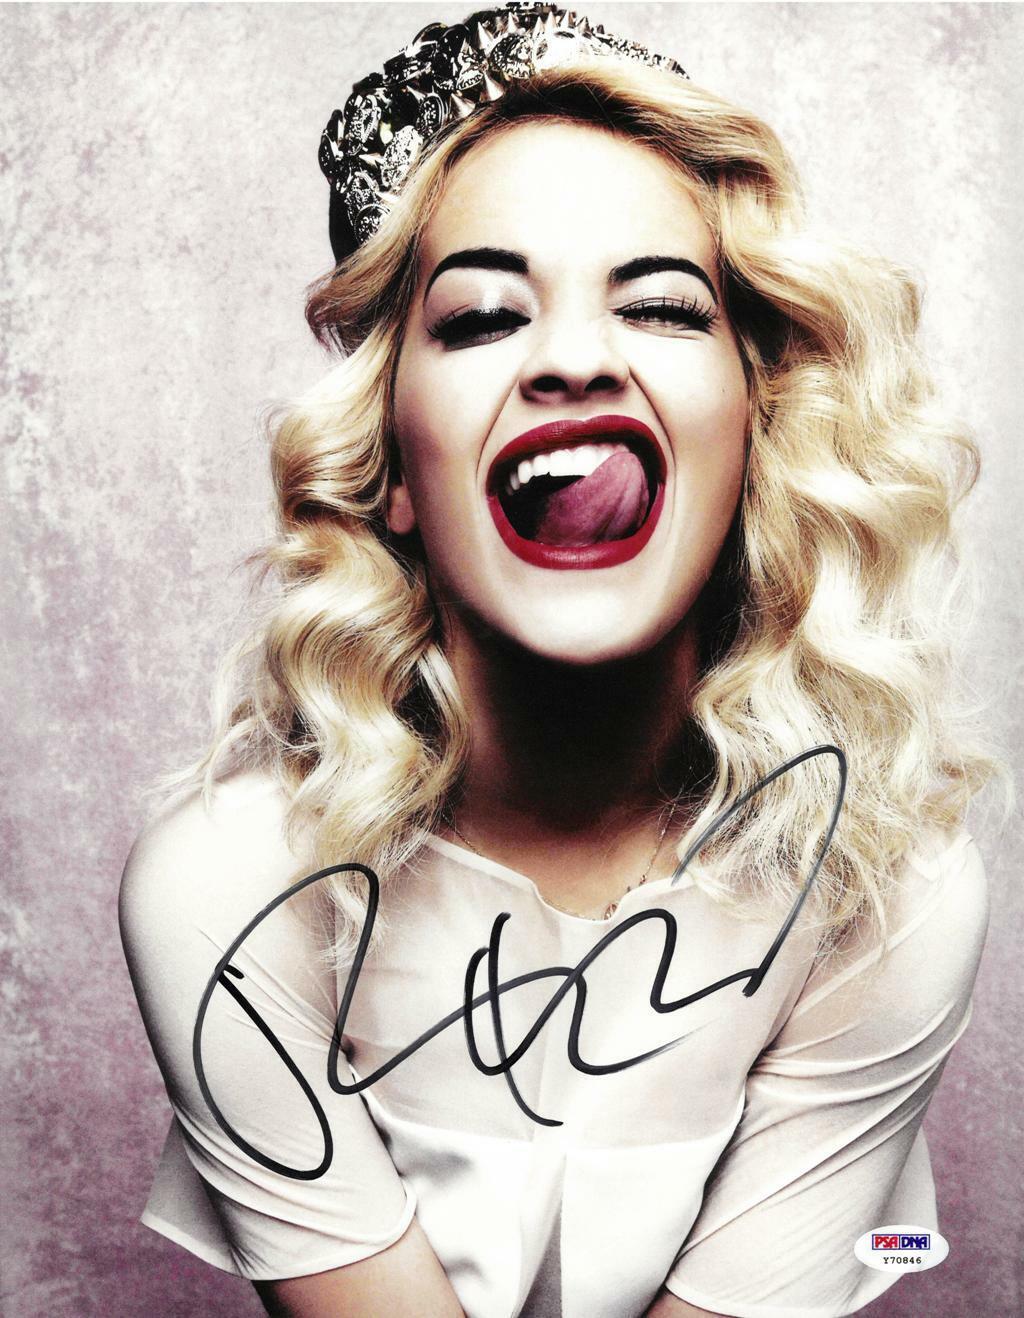 Rita Ora Signed Authentic Autographed 11x14 Photo Poster painting PSA/DNA #Y70846